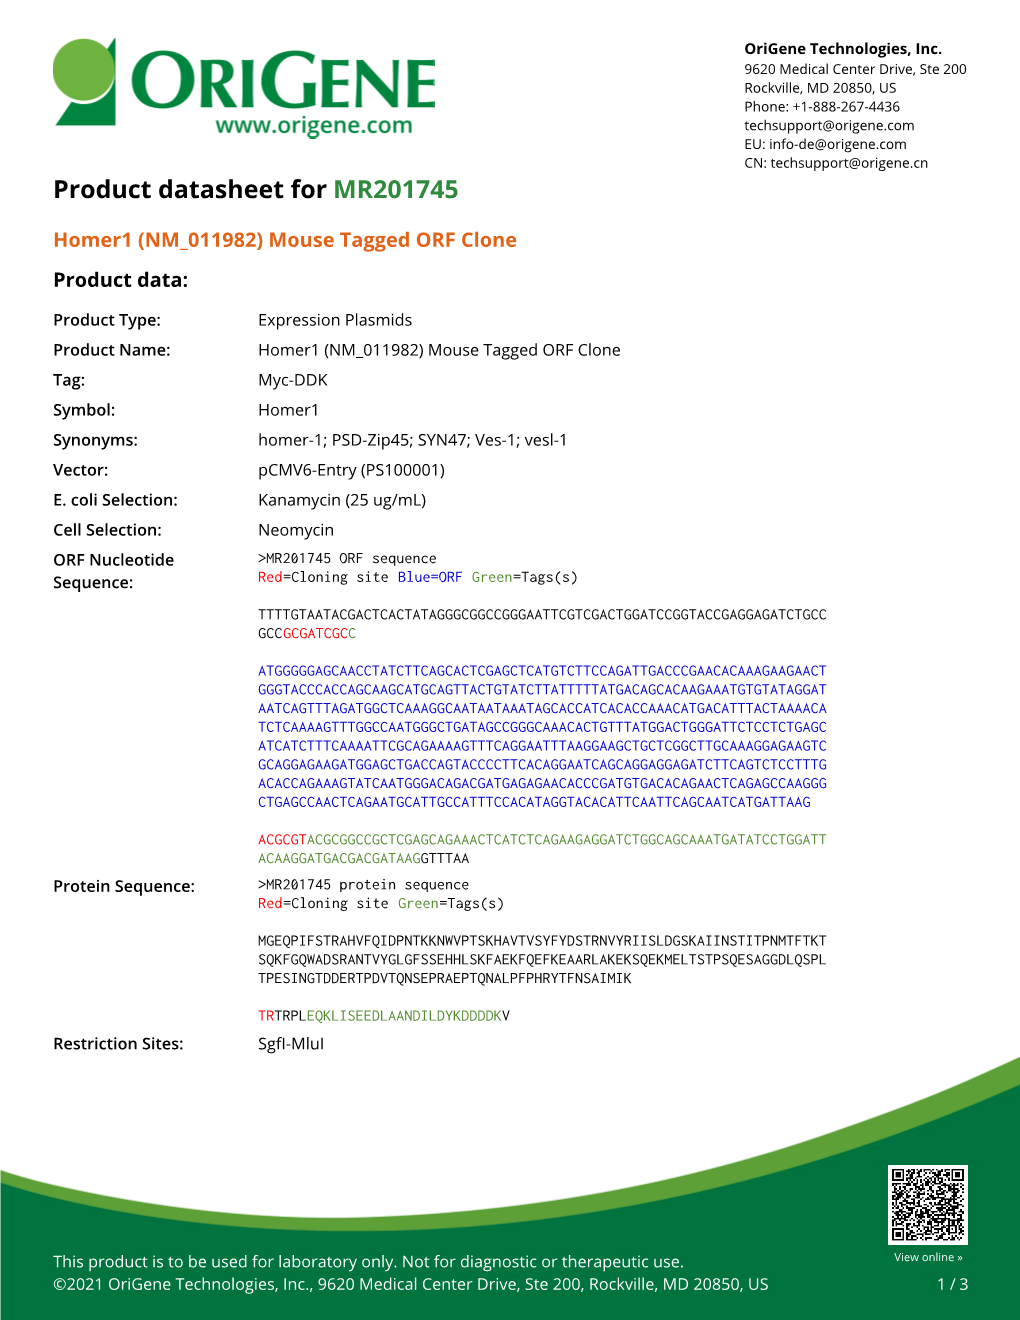 Homer1 (NM 011982) Mouse Tagged ORF Clone Product Data